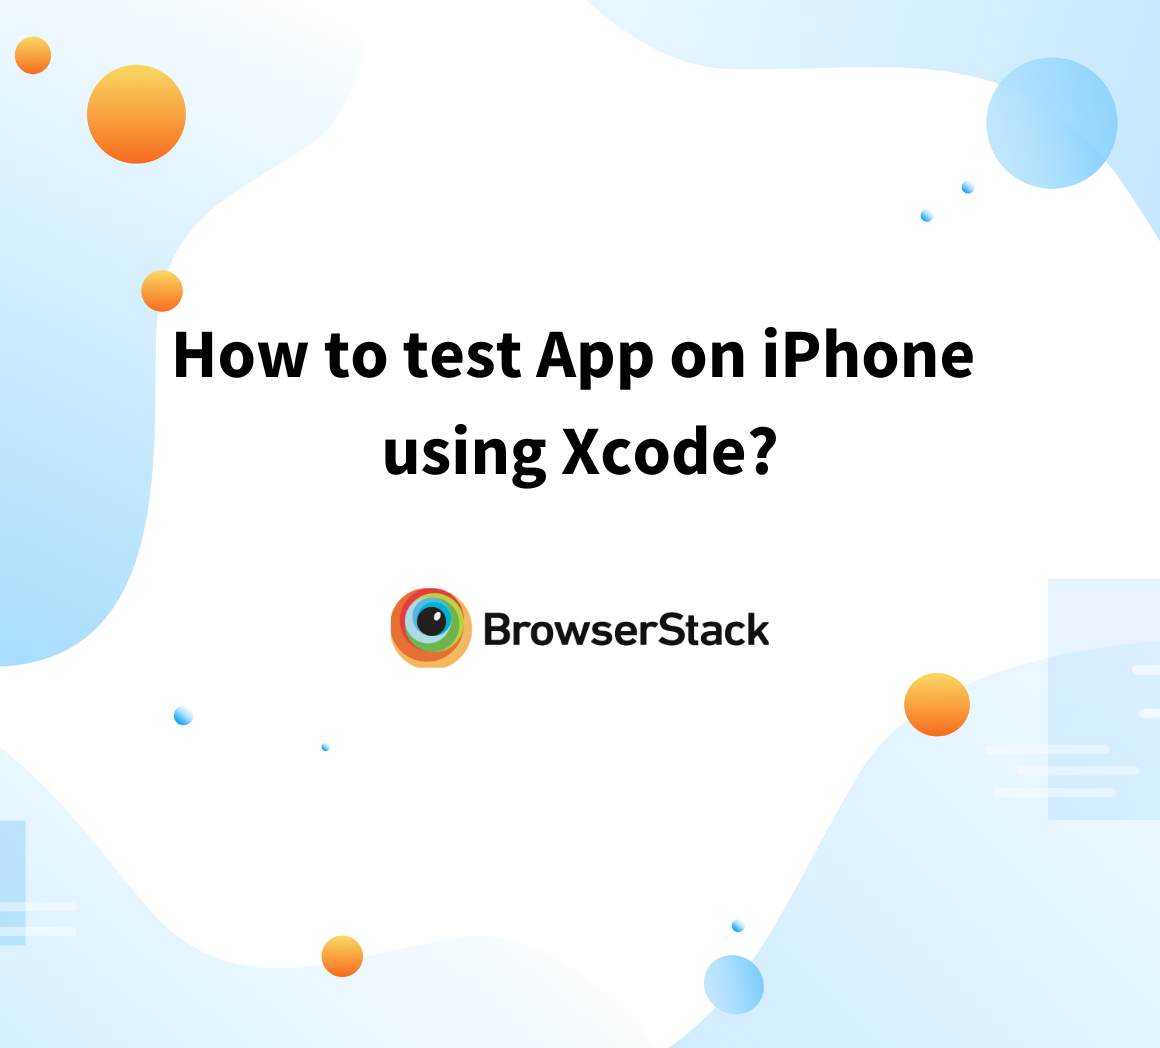 How to test App on iPhone using Xcode